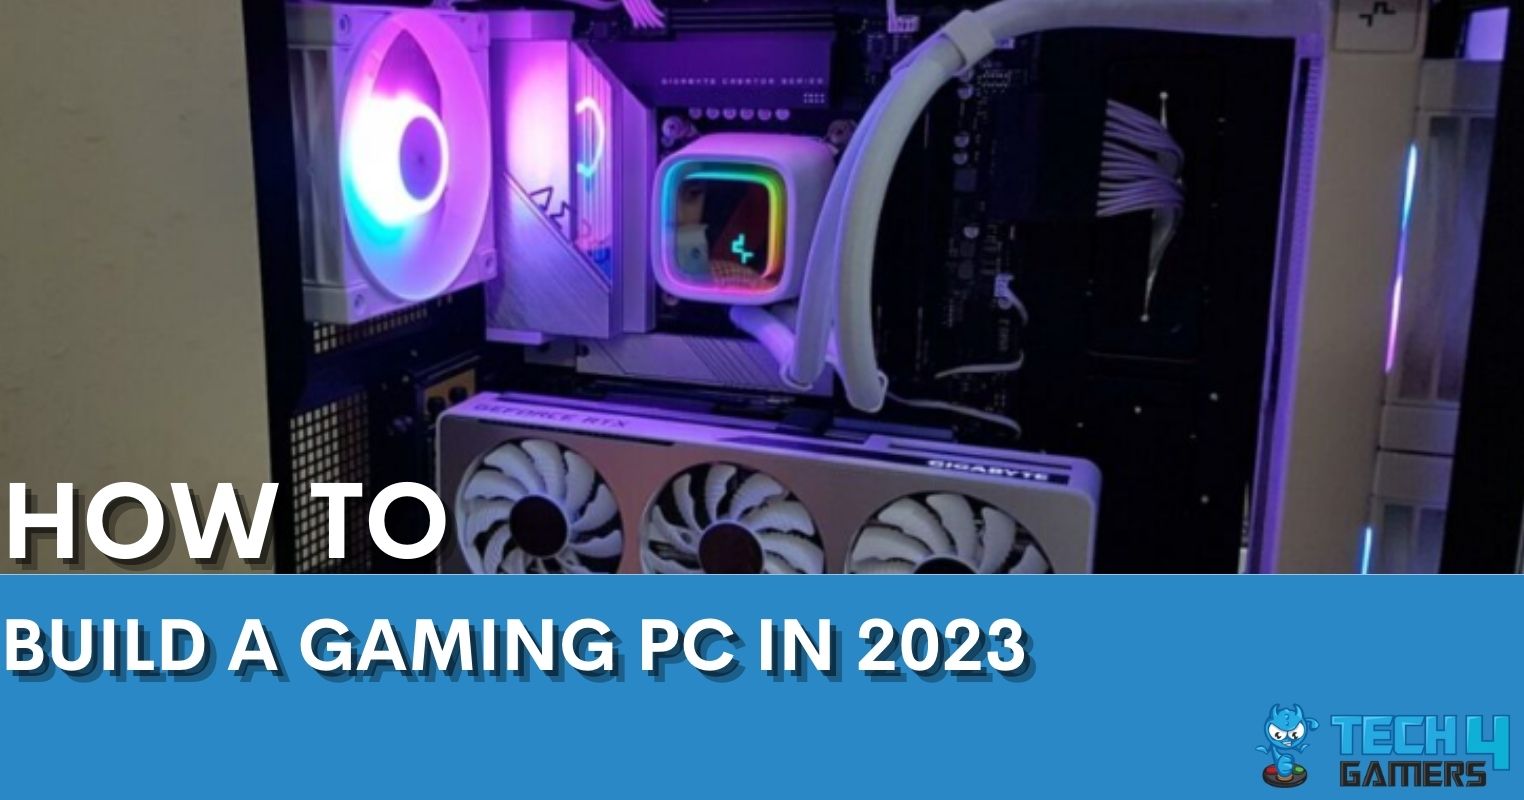 How to build a gaming PC - a beginners step by step guide - updated for 2023